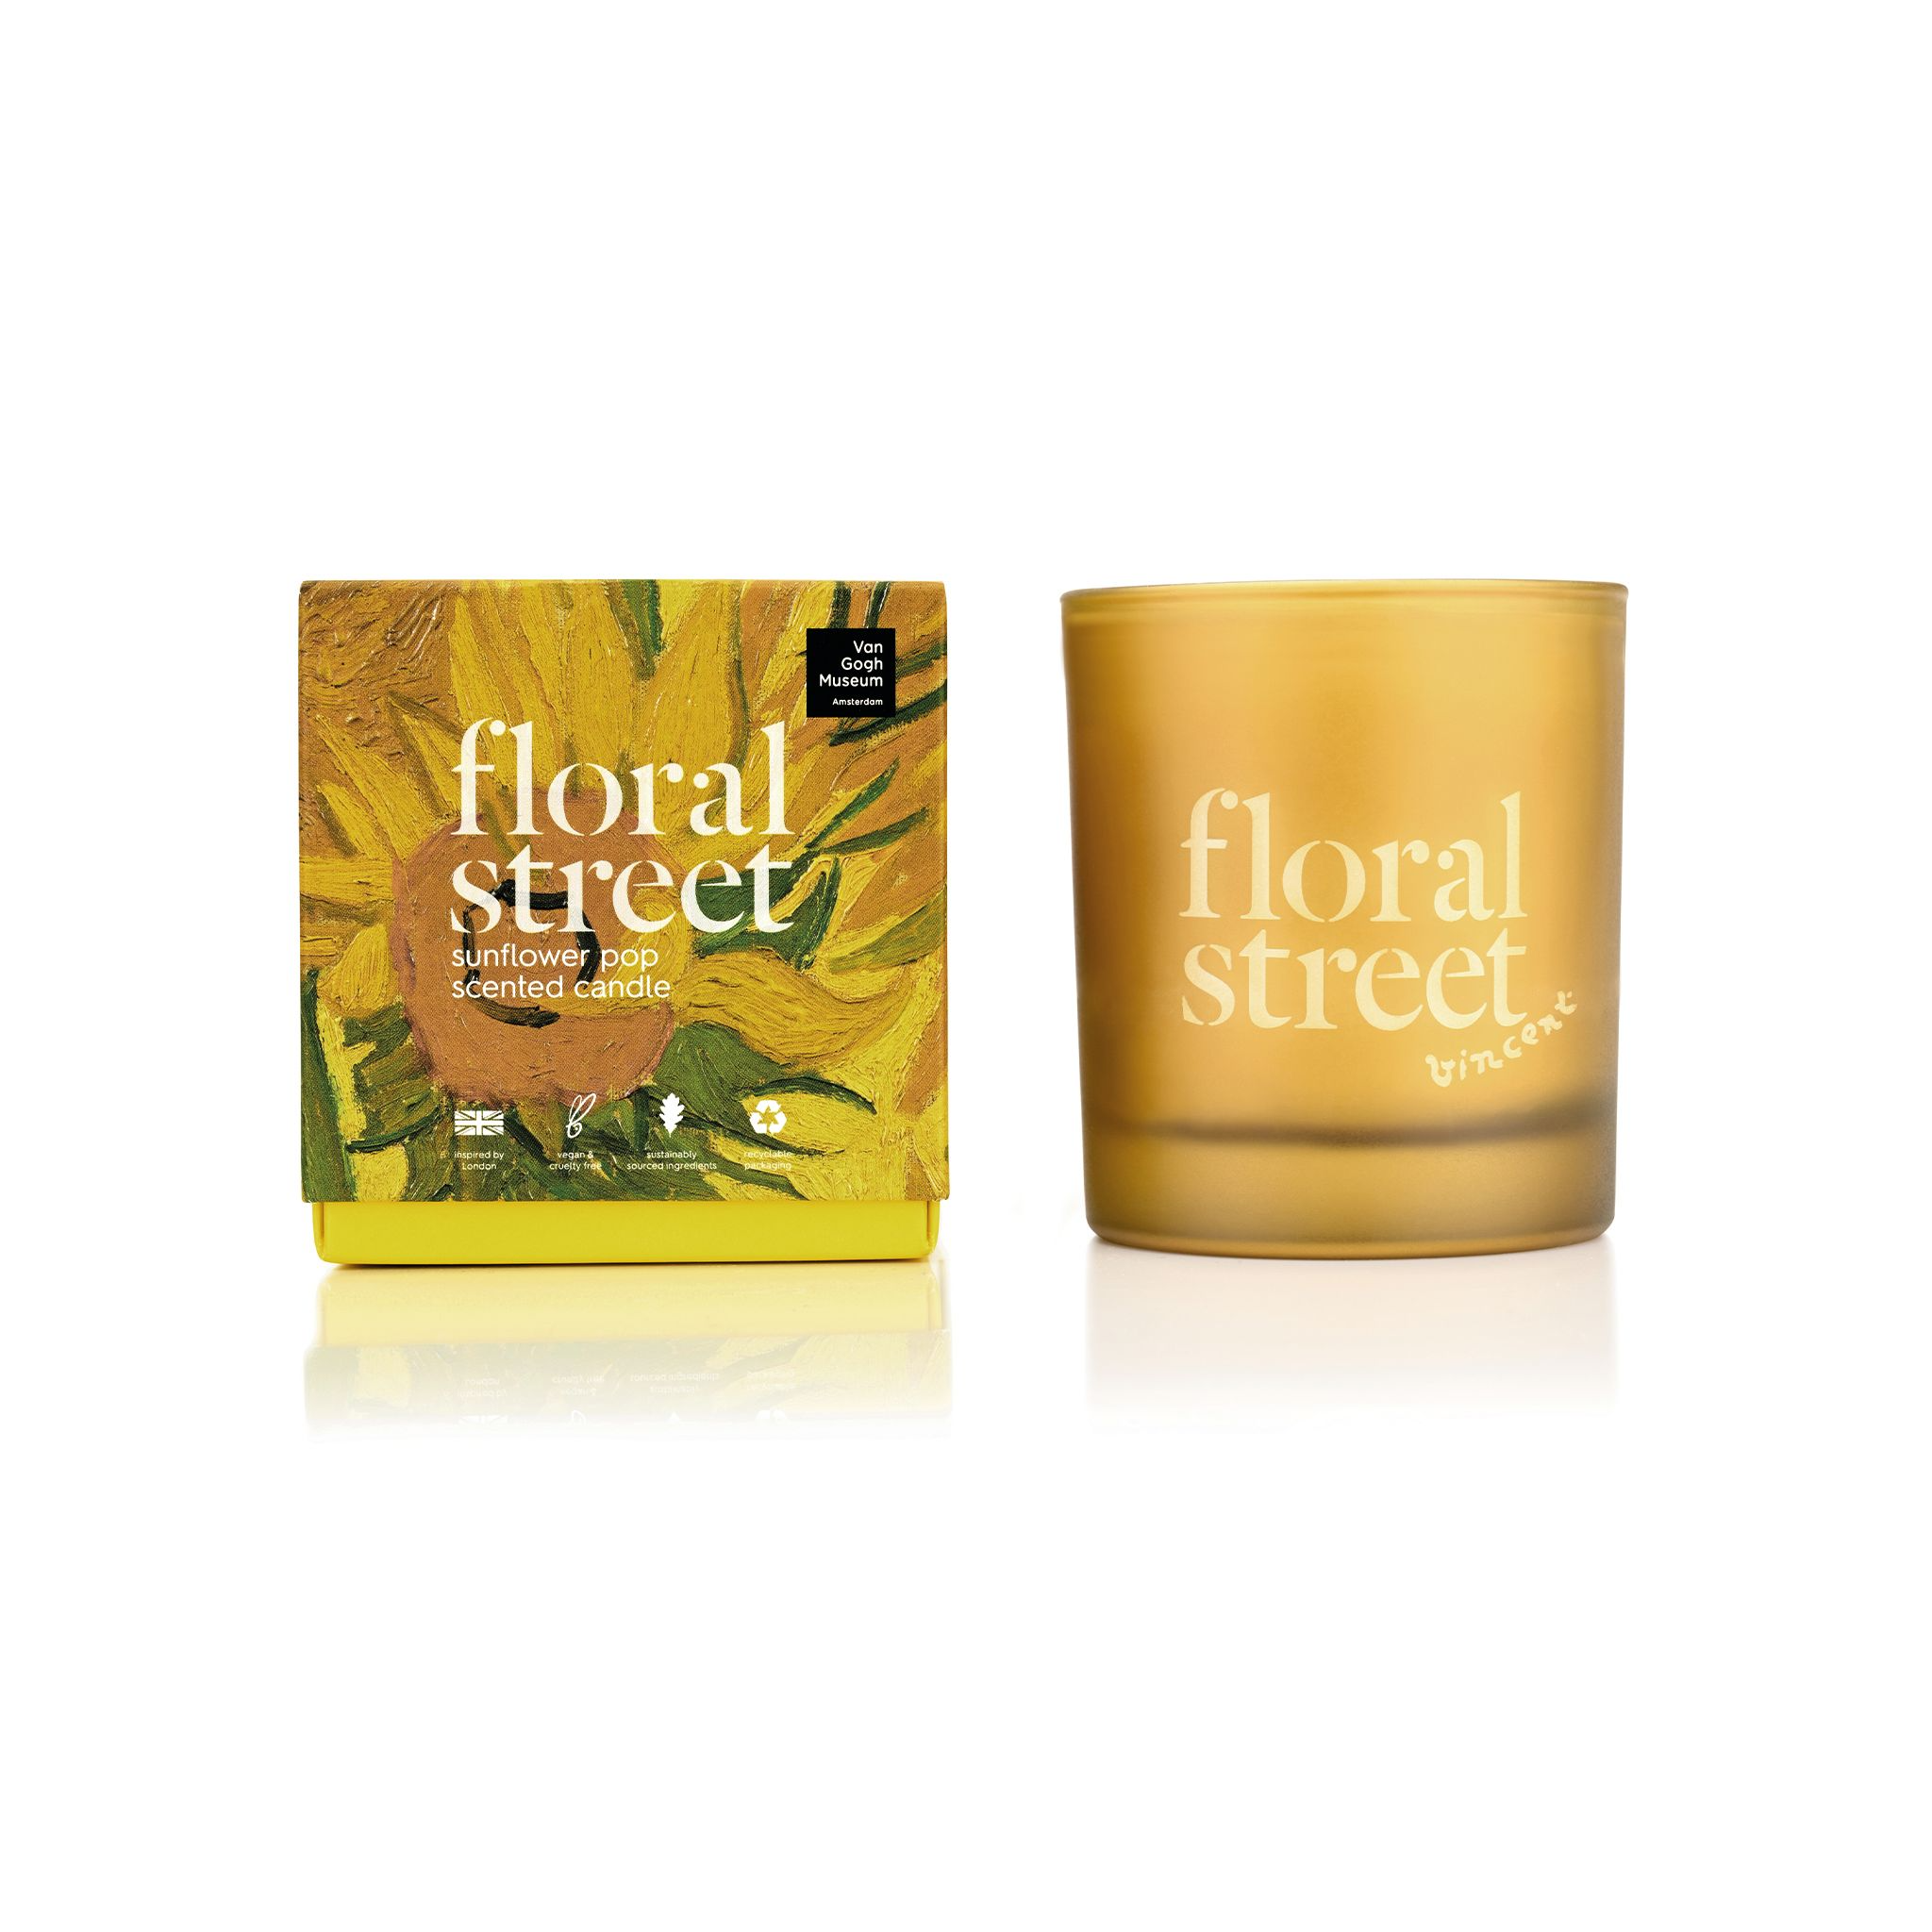 FLORAL STREET Sunflower Pop Candle